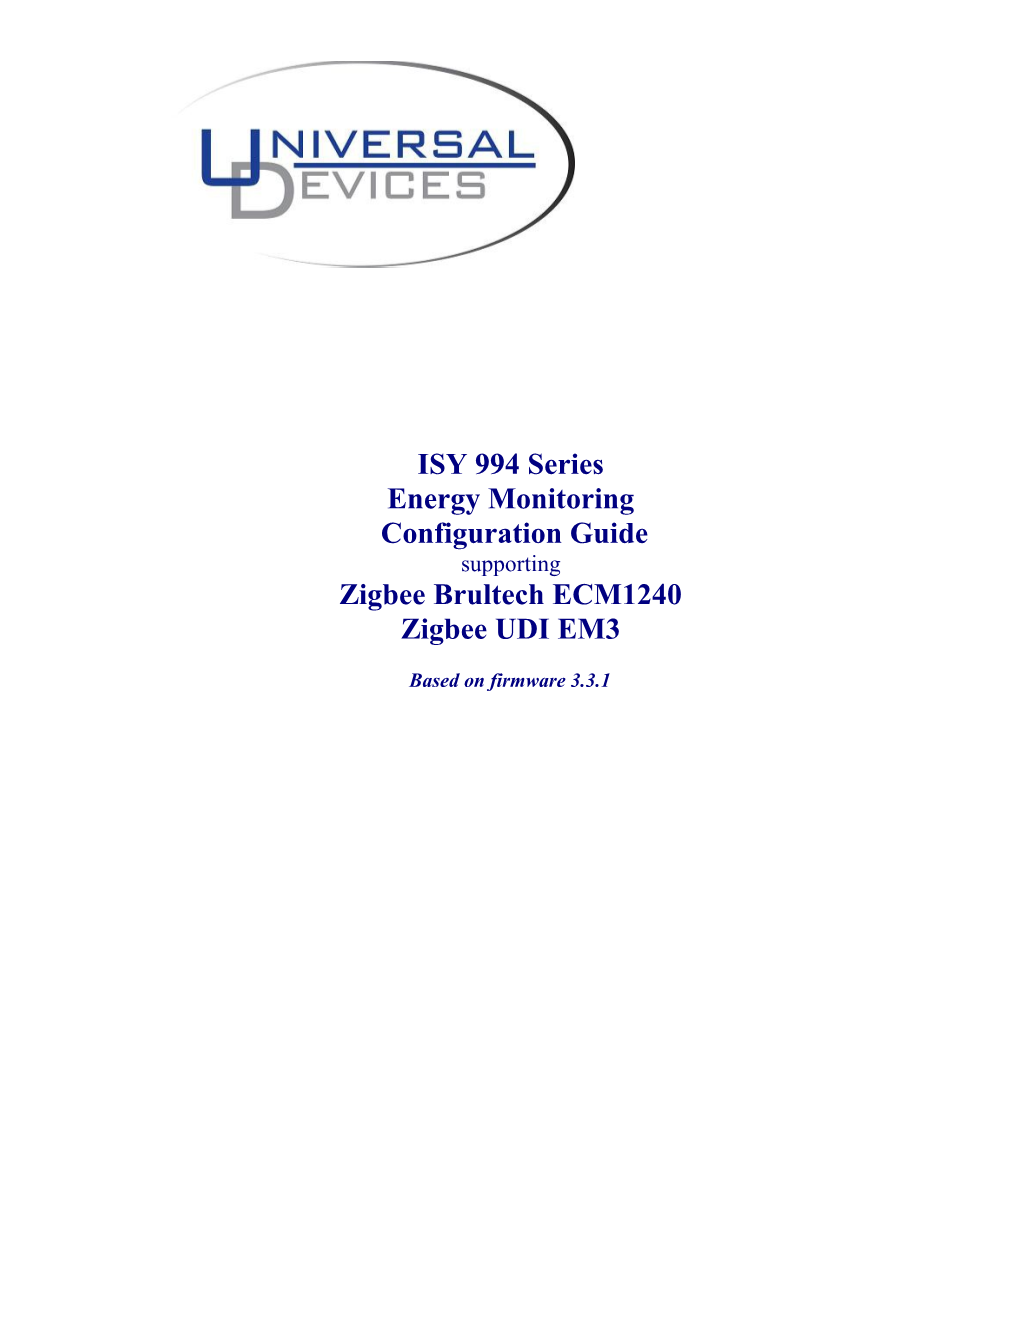 ISY994 Series Energy Monitoring Conifguration Guide